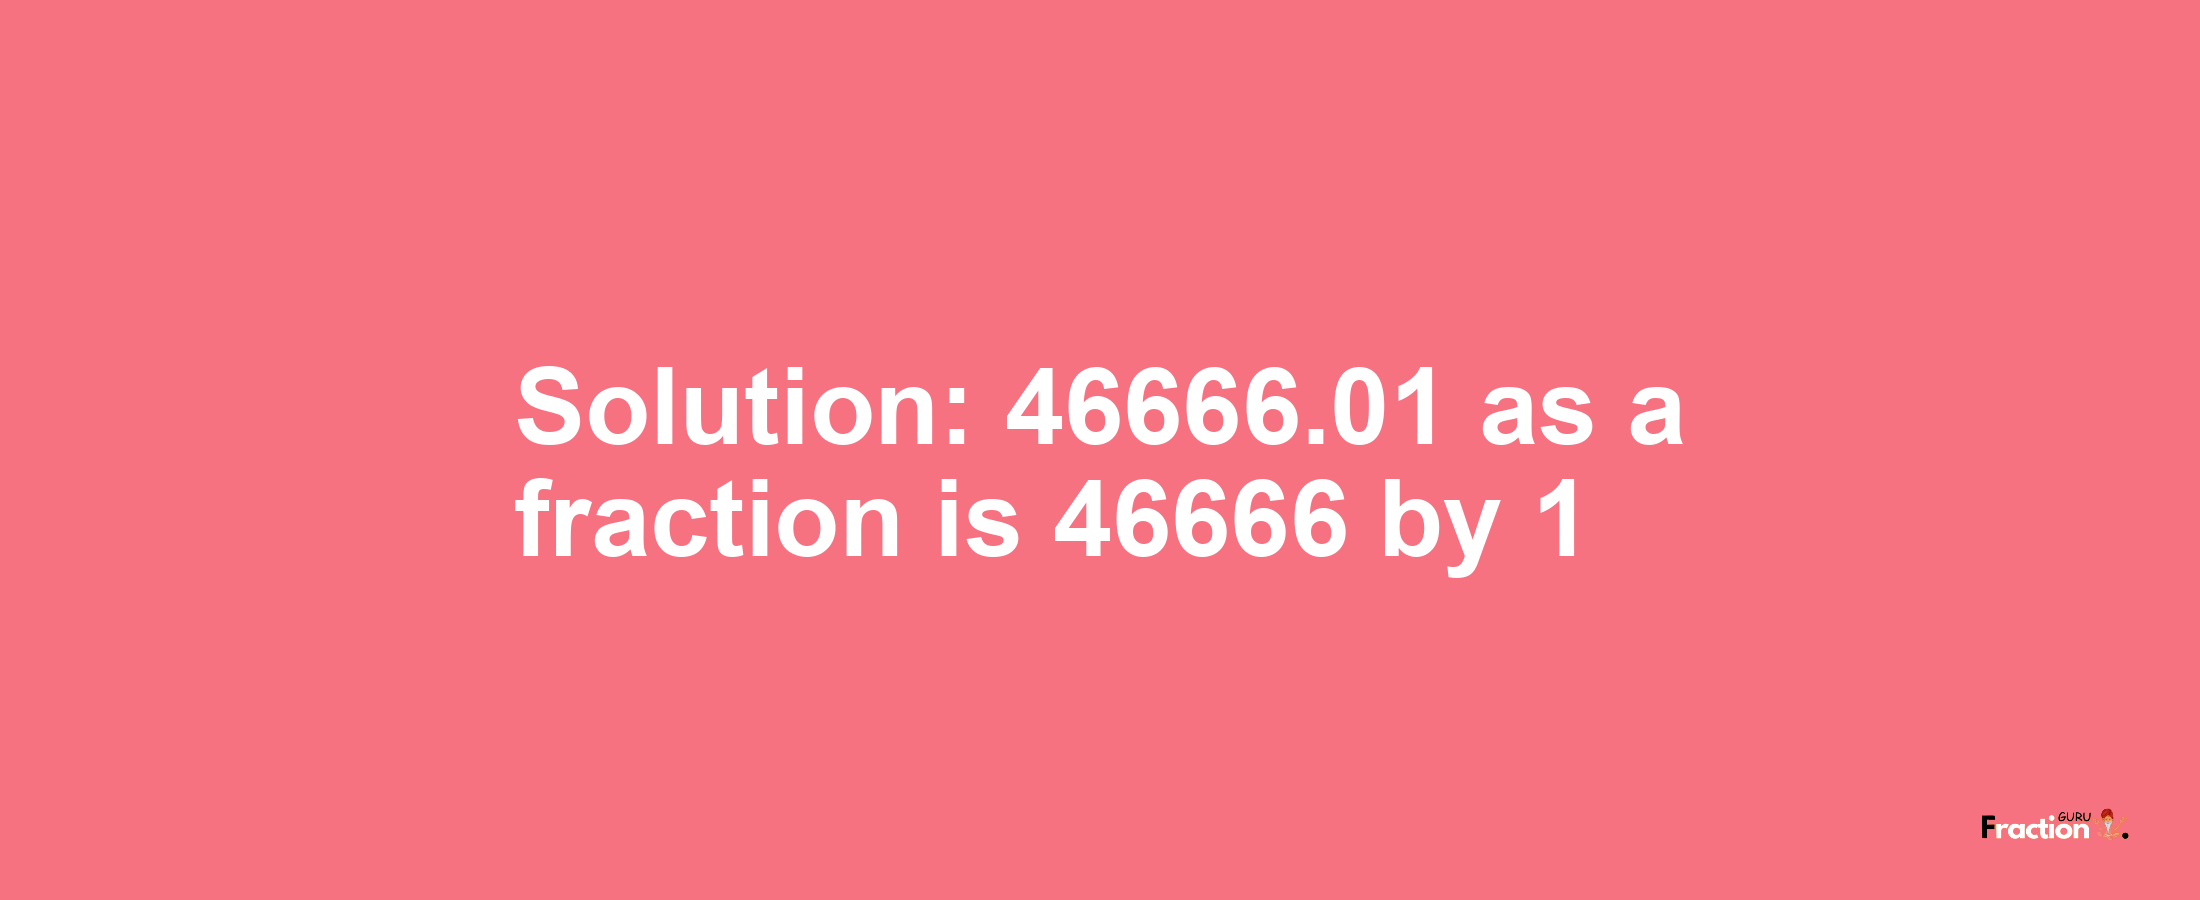 Solution:46666.01 as a fraction is 46666/1